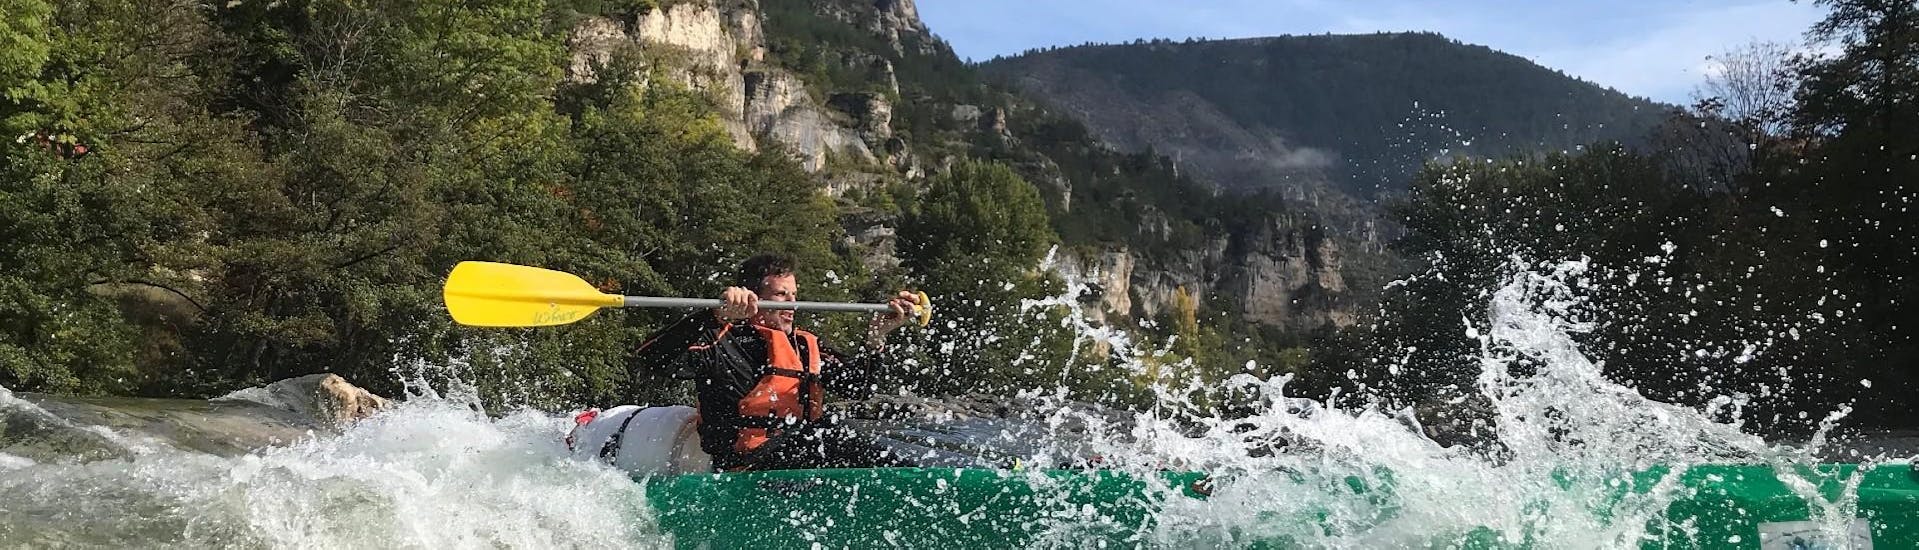 A tourist is paddling energically in the heart of the Gorges during the Canoe Rental of 24km on the Tarn with Canoe La Cazelle Gorges du Tarn.